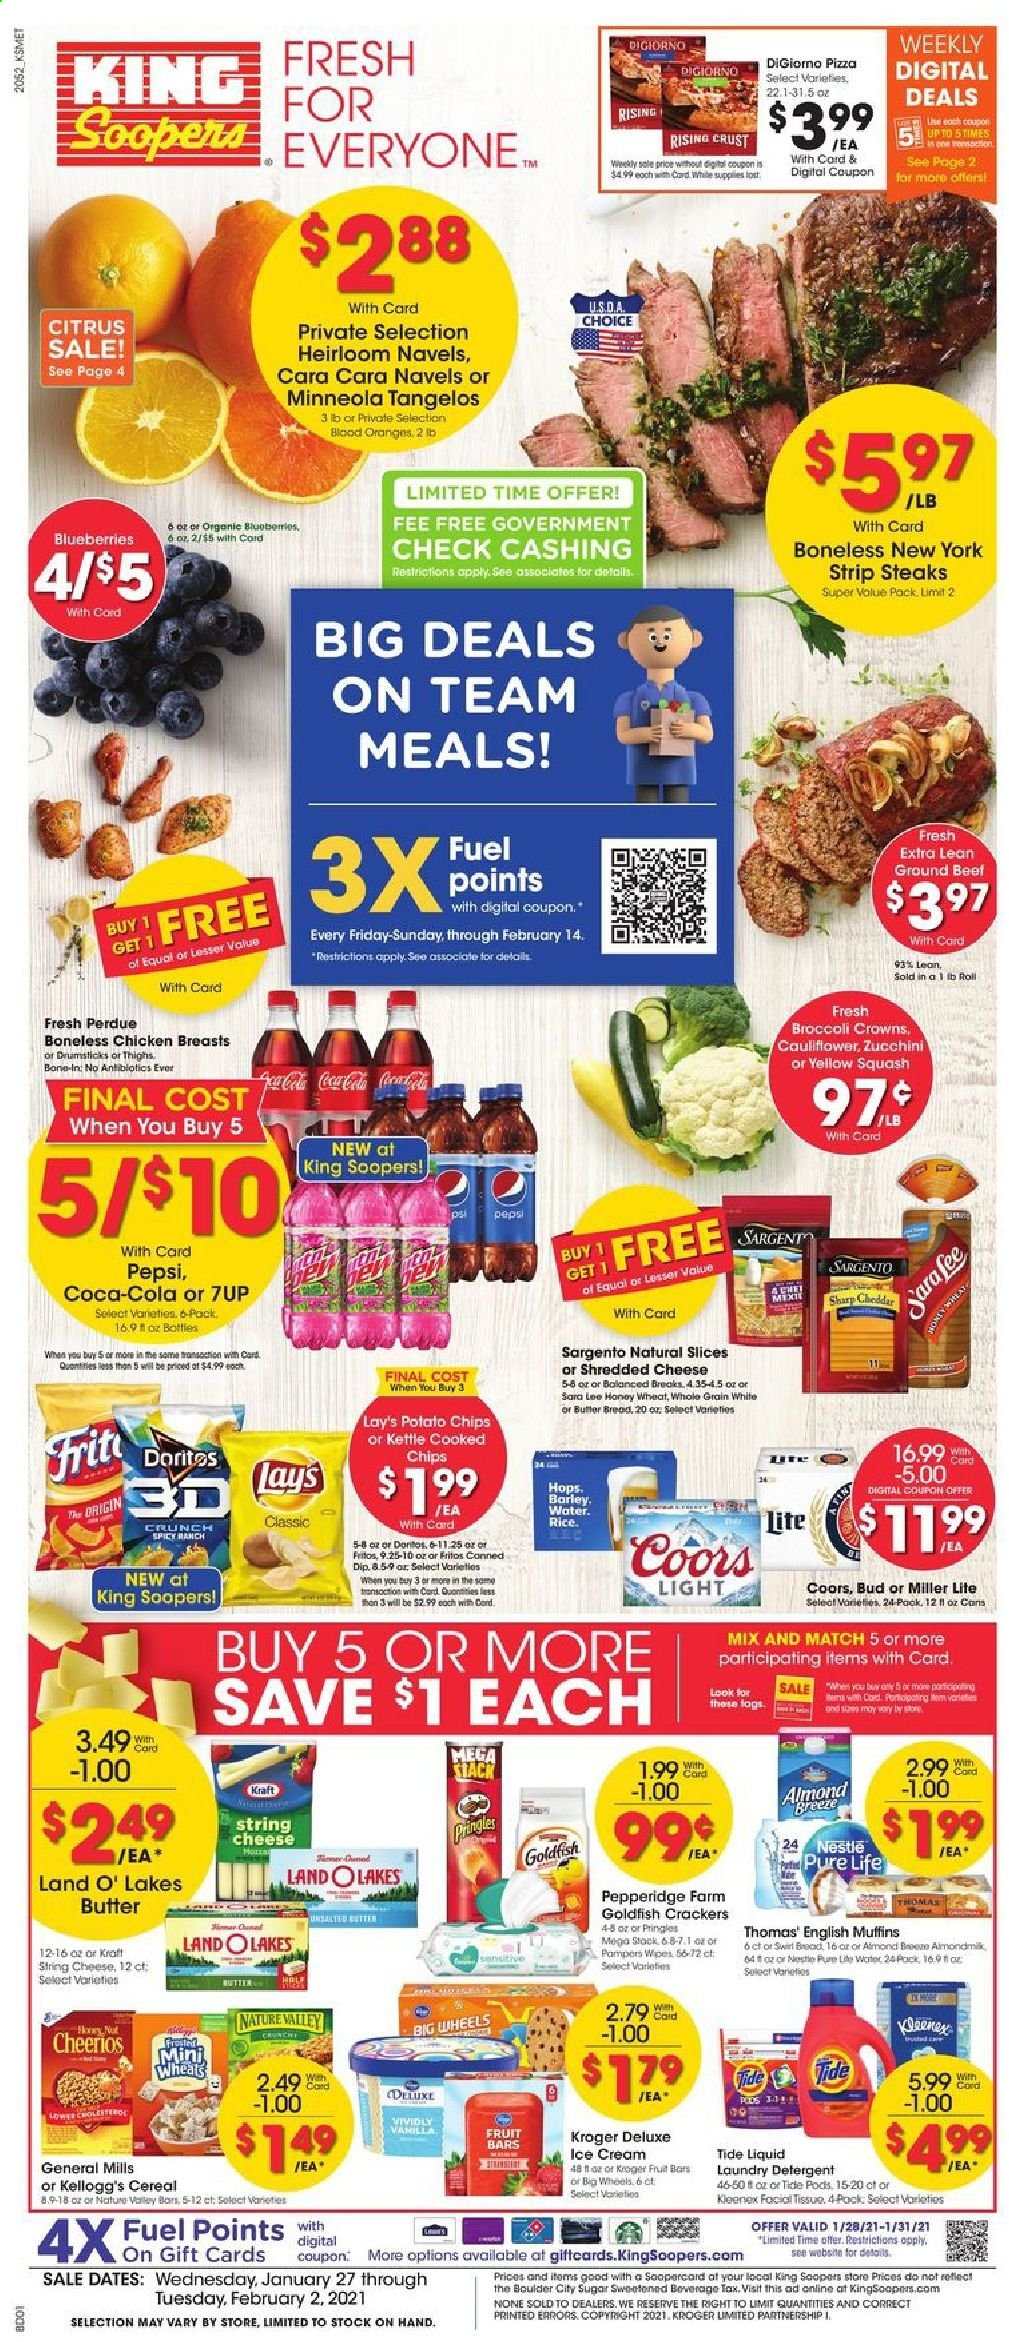 thumbnail - King Soopers Flyer - 01/27/2021 - 02/02/2021 - Sales products - blueberries, tangelos, bread, Sara Lee, muffin, oranges, english muffins, pizza, Perdue®, Kraft®, shredded cheese, string cheese, cheddar, Sargento, dip, ice cream, cauliflower, zucchini, Nestlé, crackers, Kellogg's, potato chips, Pringles, chips, Lay’s, Goldfish, sugar, cereals, Fritos, Cheerios, Nature Valley, almonds, Coca-Cola, Pepsi, 7UP, beer, Miller Lite, Coors, chicken breasts, beef meat, ground beef, steak, striploin steak, Kleenex, tissues, detergent, Tide, laundry detergent, Sharp, Lee. Page 1.